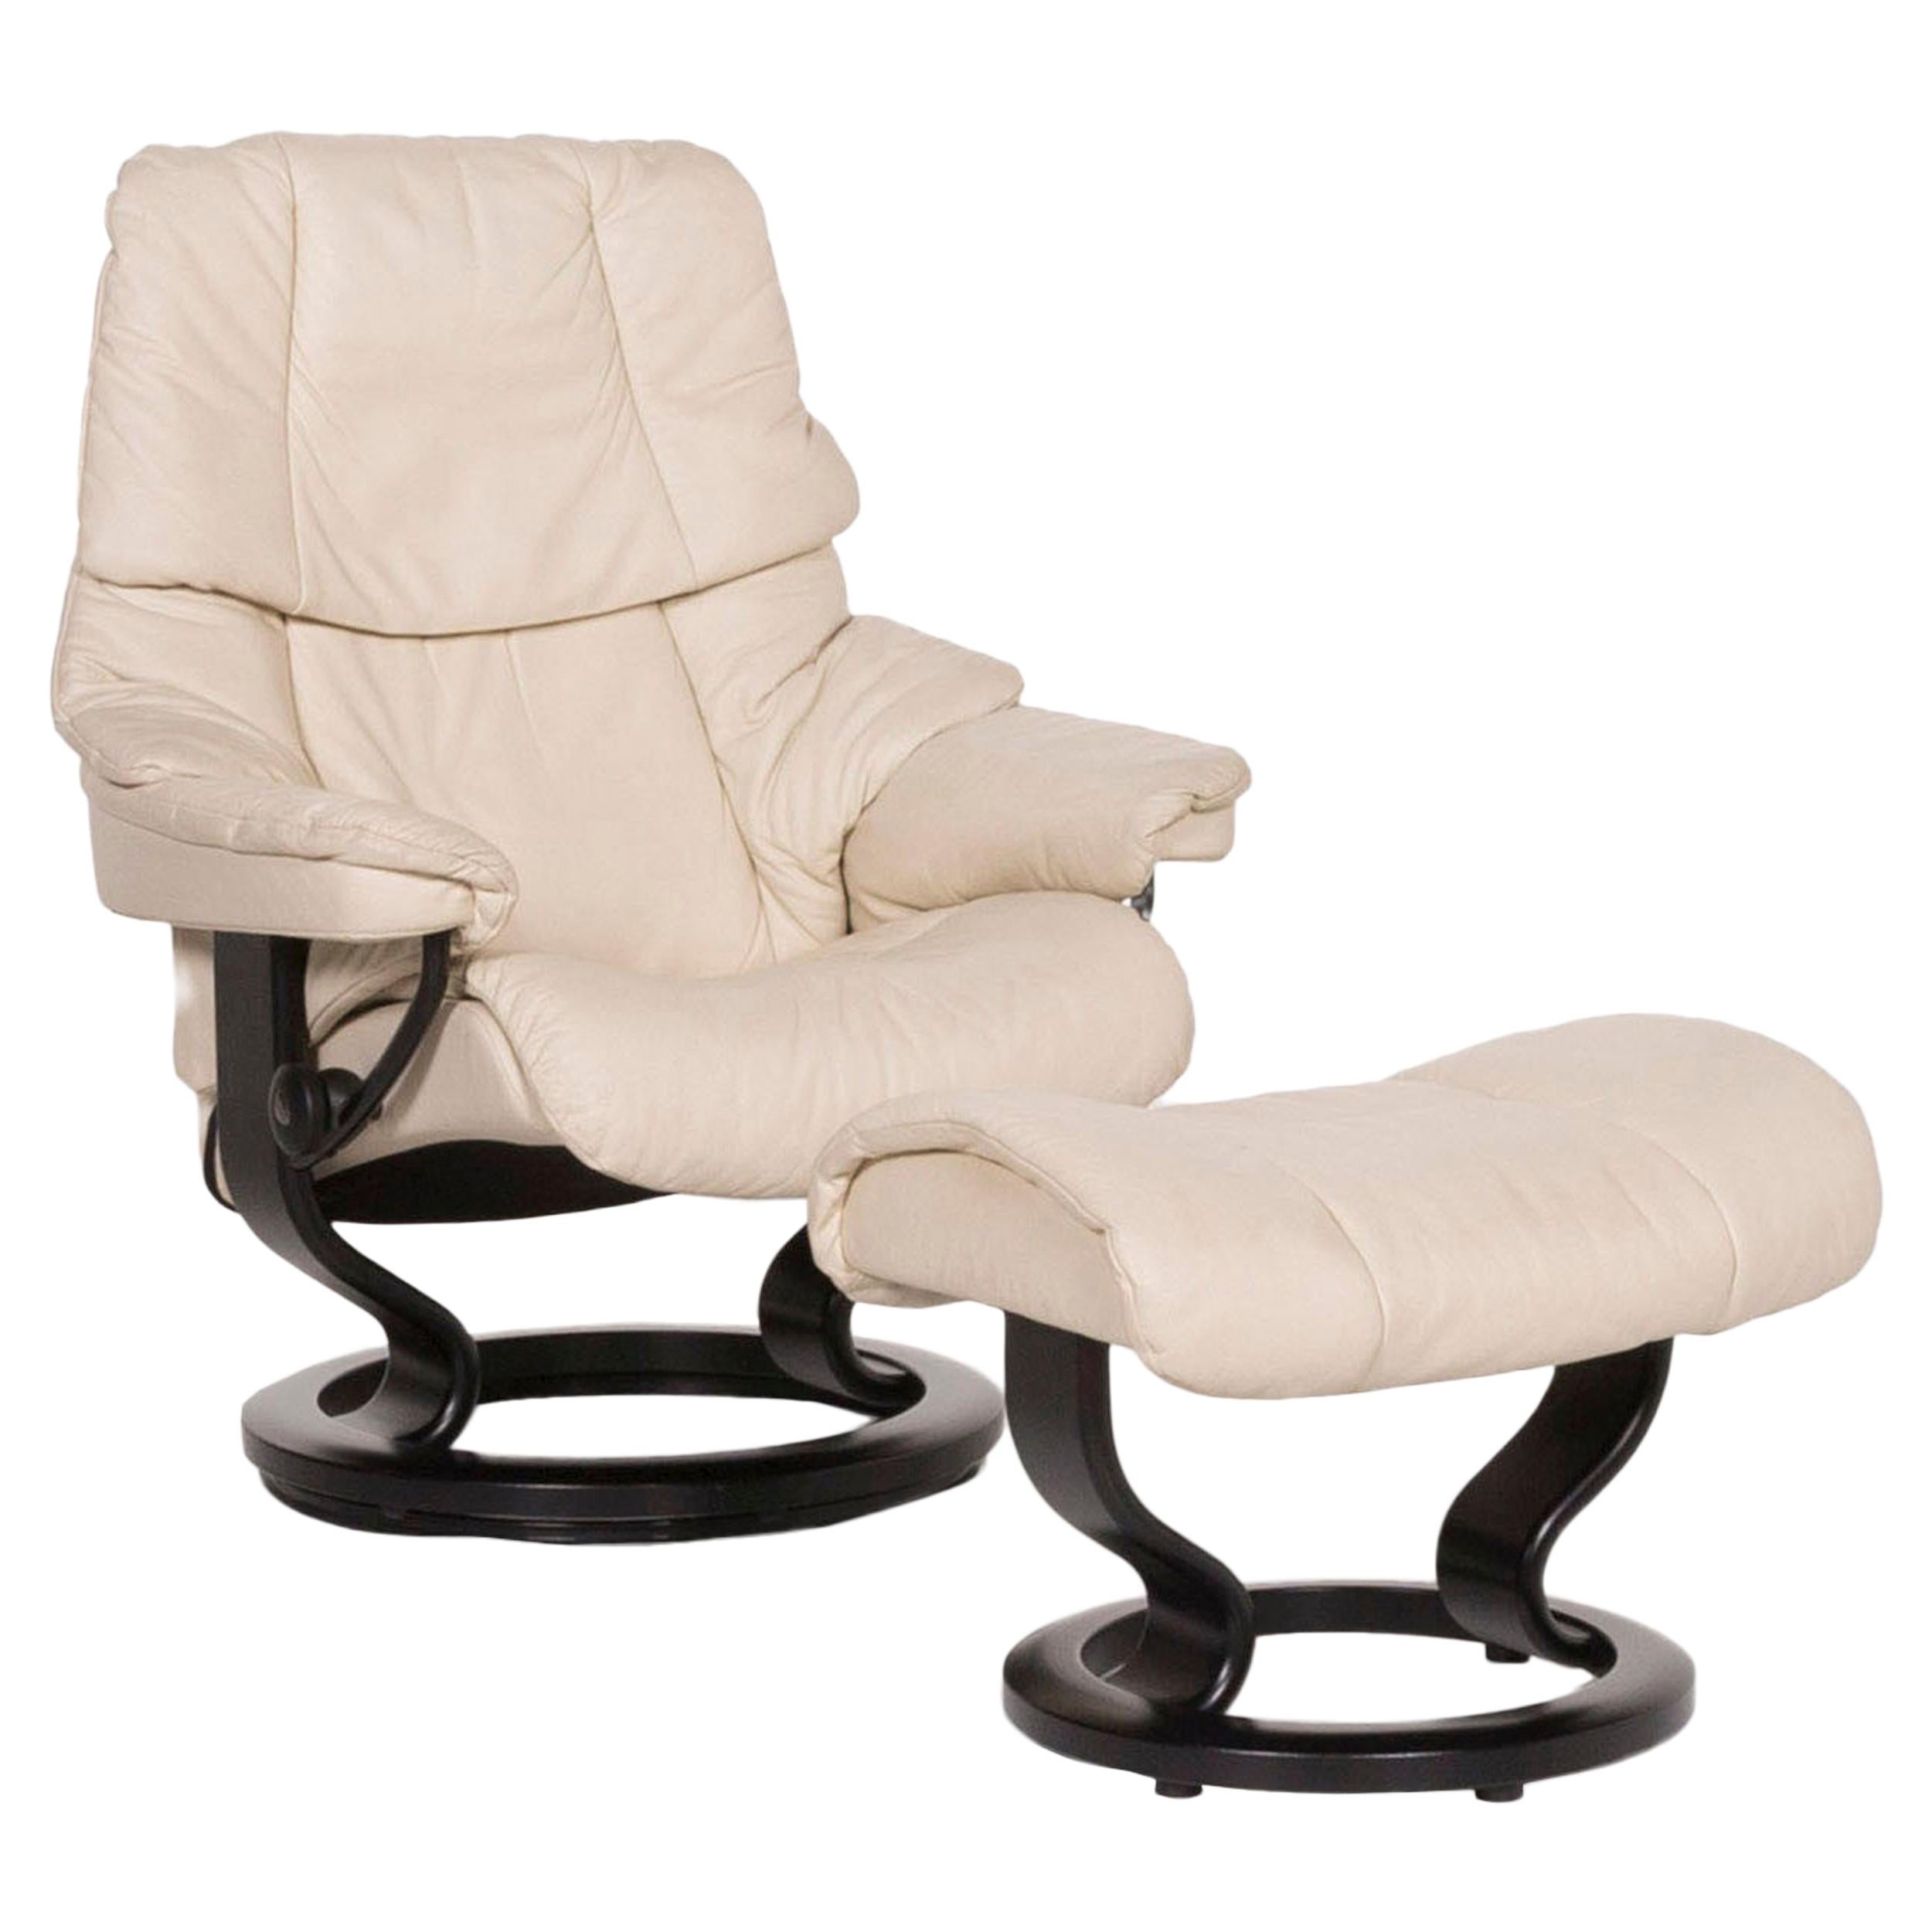 Stressless Reno Leather Armchair Cream Incl. Stool